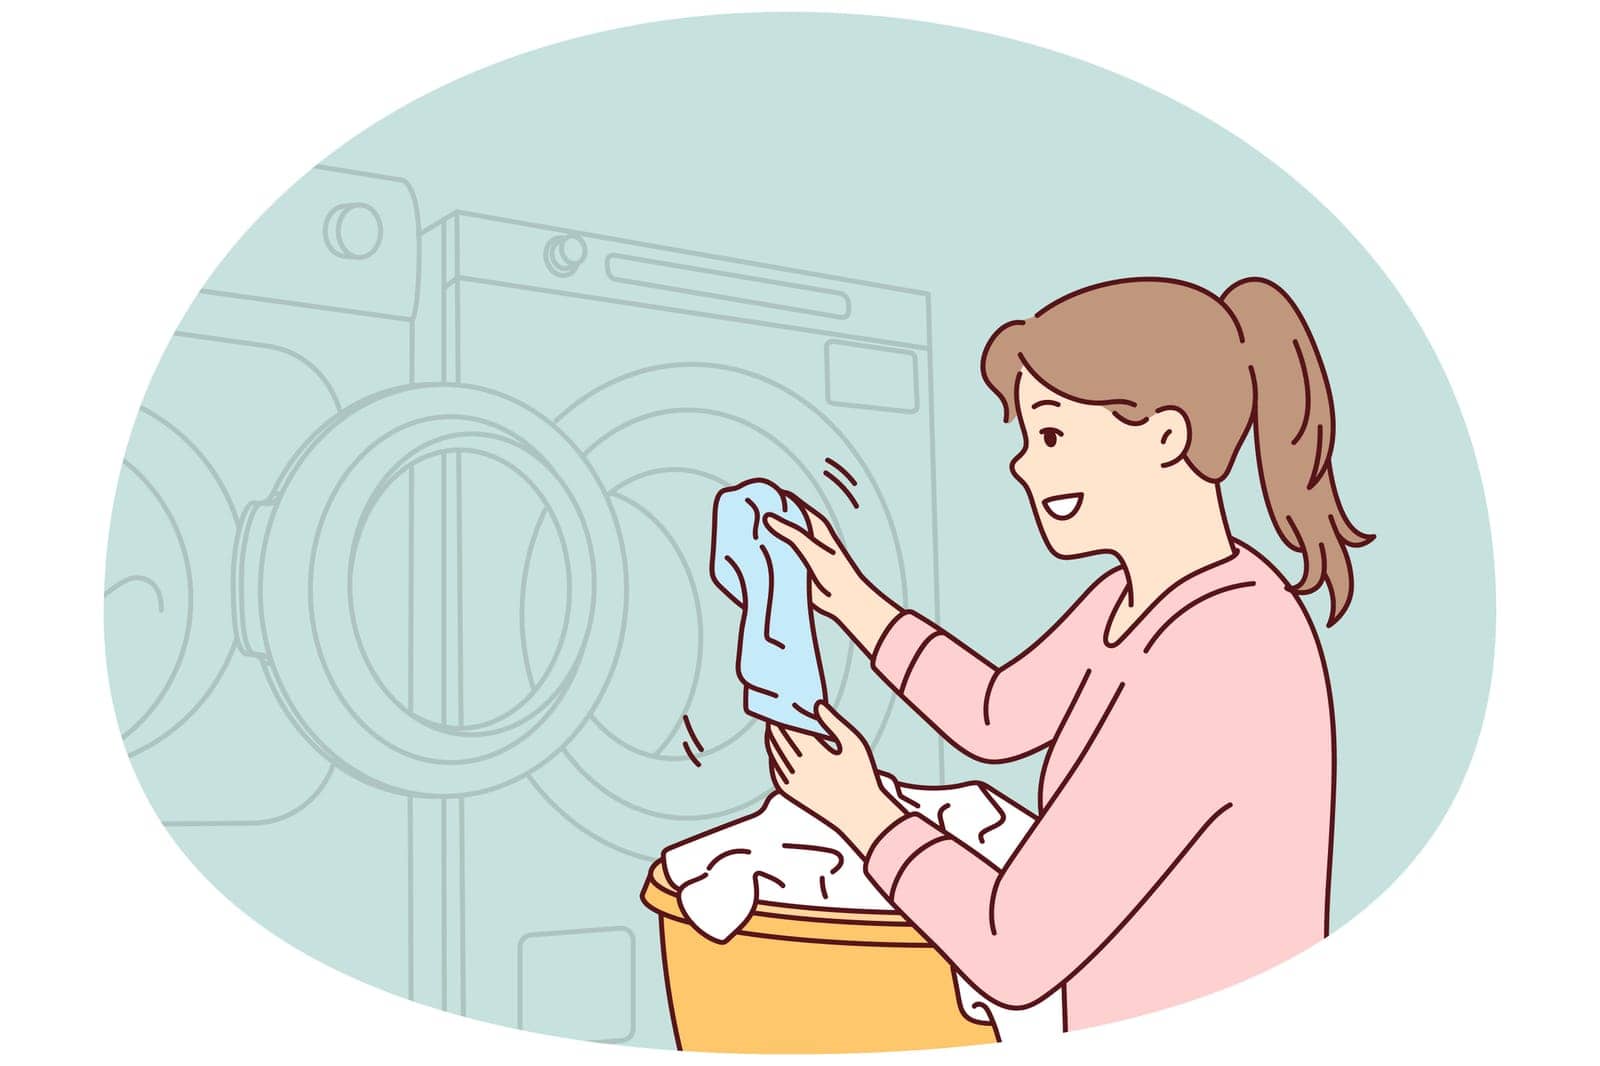 Woman throws dirty laundry into washing machine to make laundry fresh and smell good. Vector image by Vasilyeva